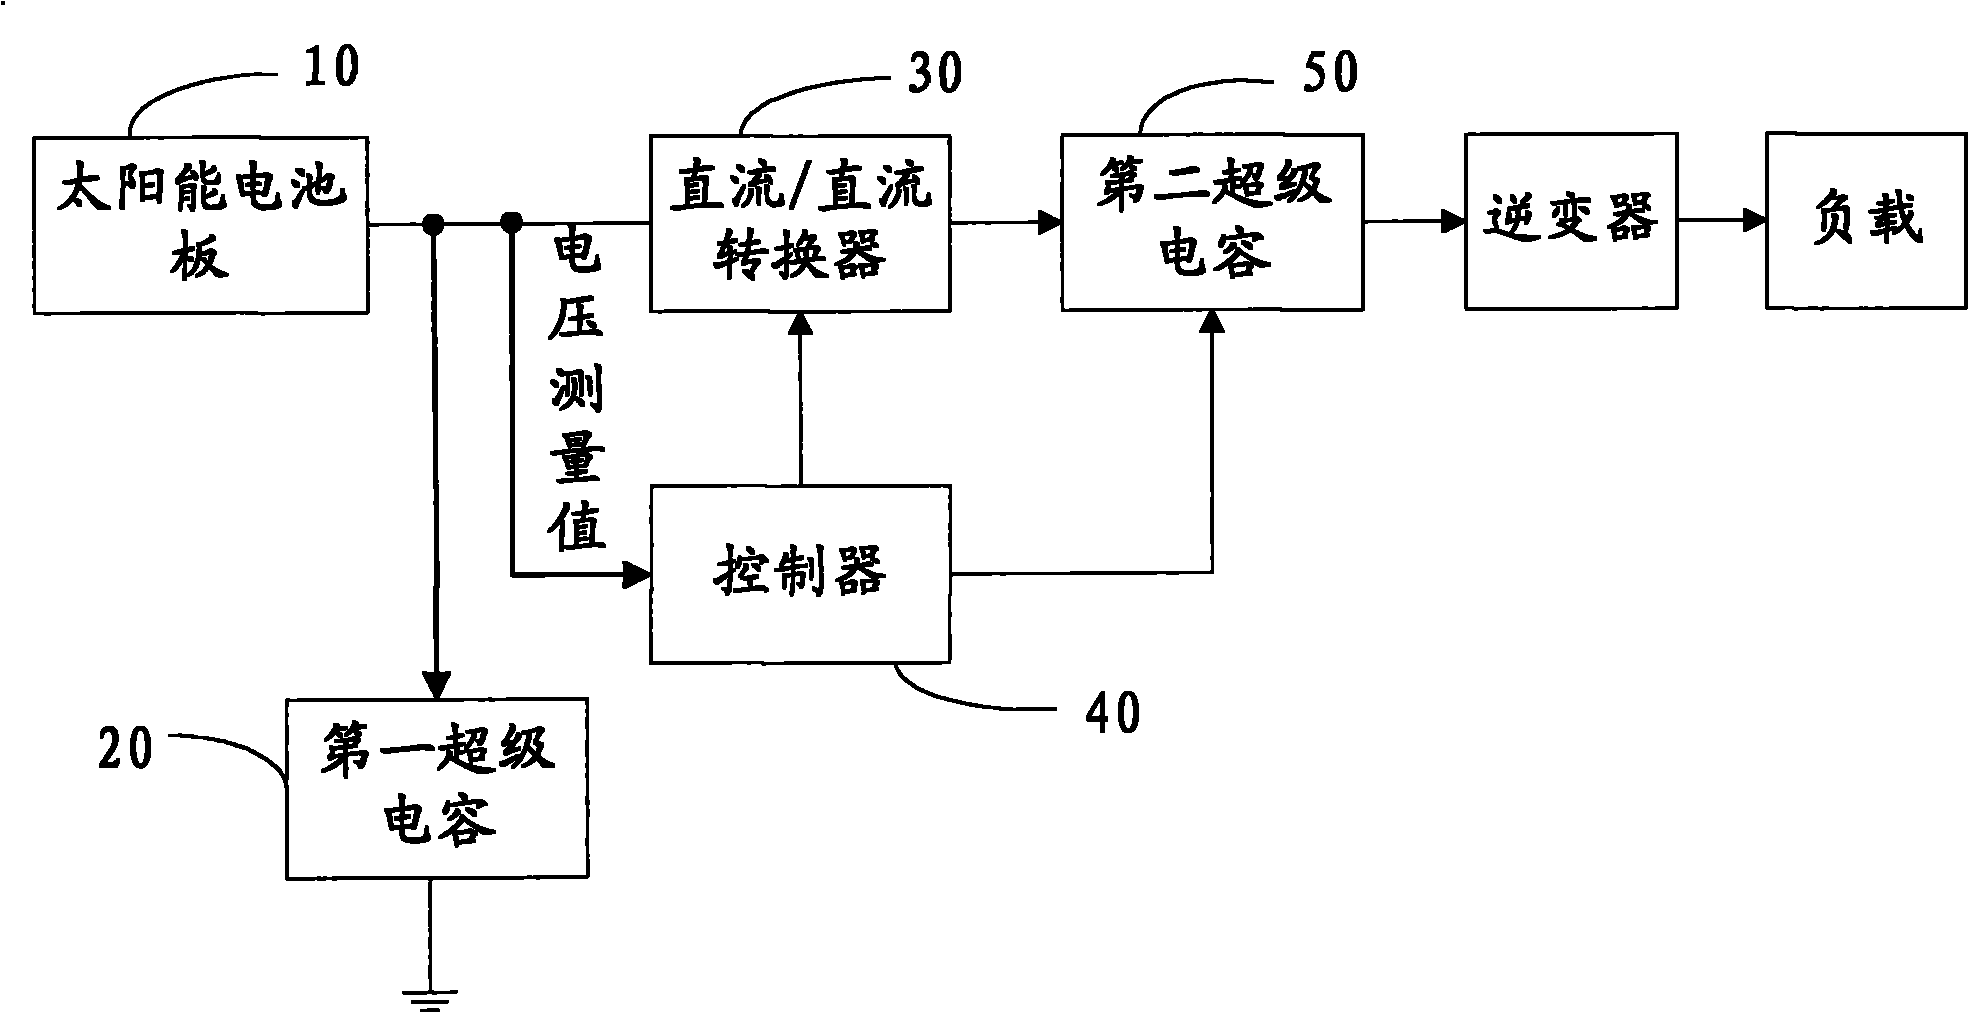 Solar energy power generation and storage system and method